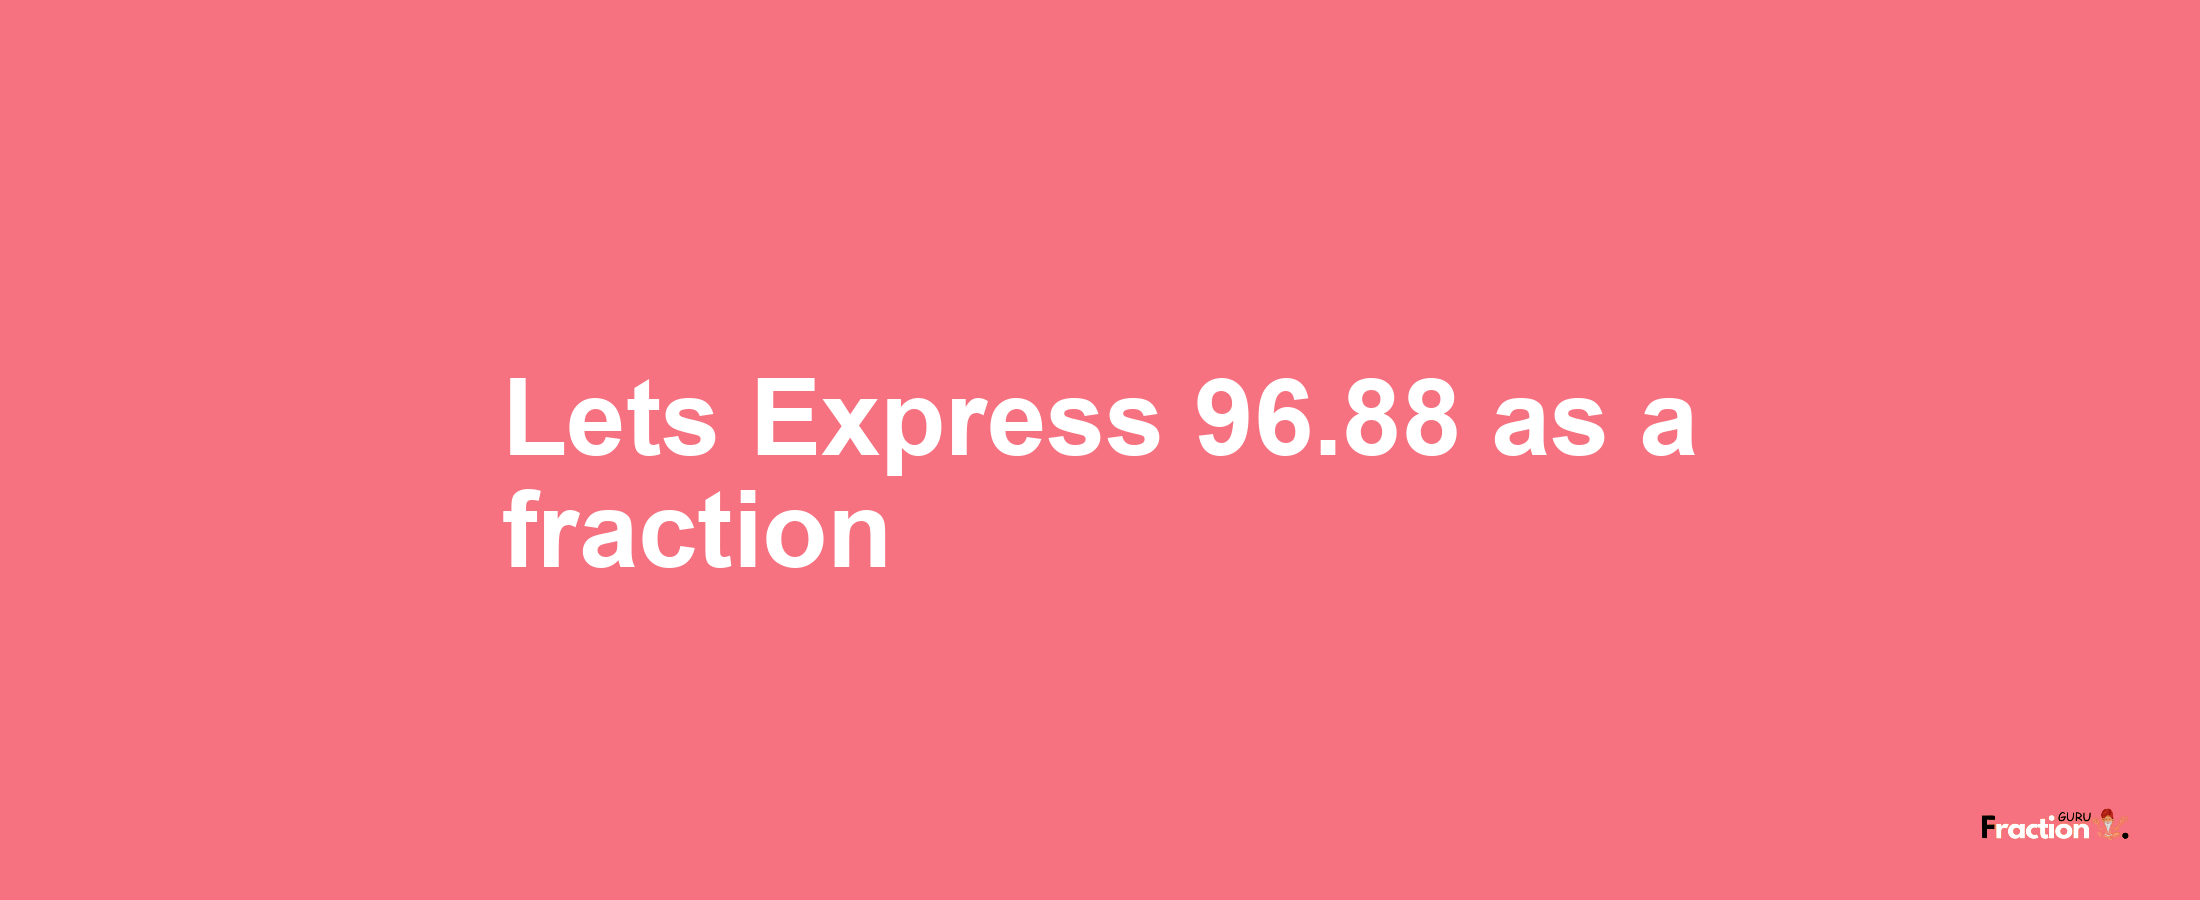 Lets Express 96.88 as afraction